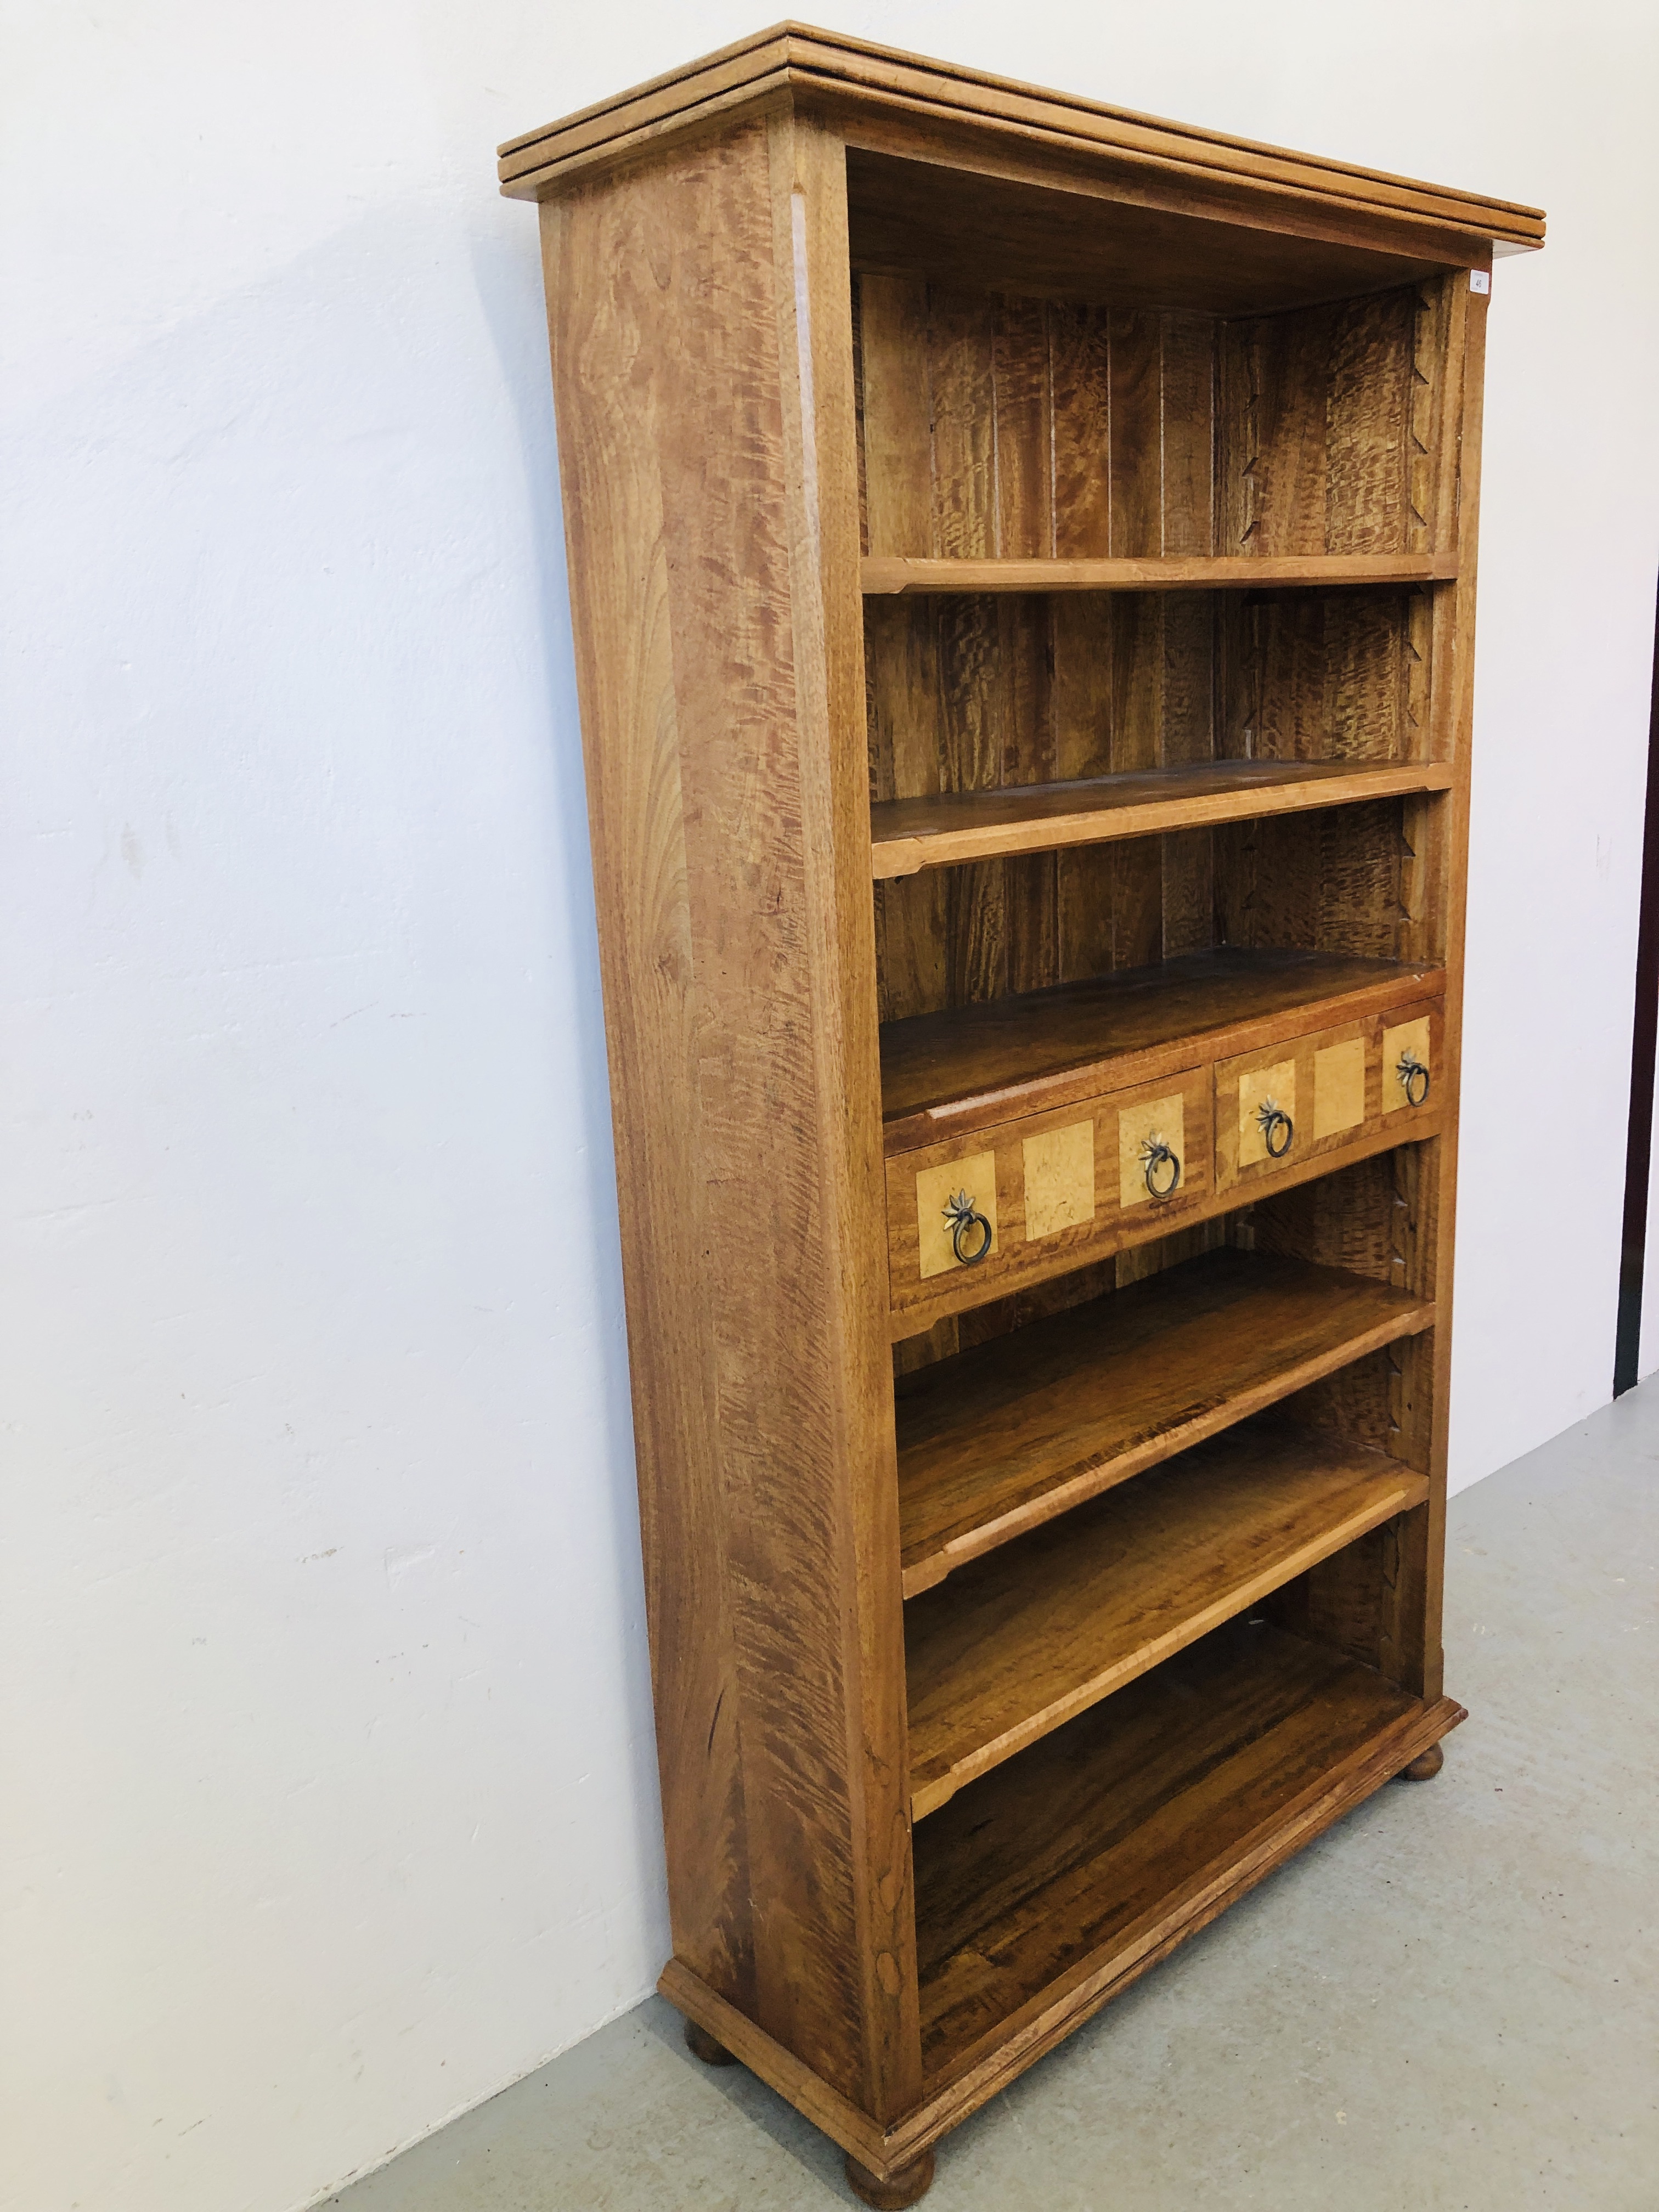 BAKER BEDFORD STYLE FLAGSTORE TWO DRAWER BOOKSHELF WITH ADJUSTABLE STELVES - HEIGHT 190CM. - Image 6 of 8